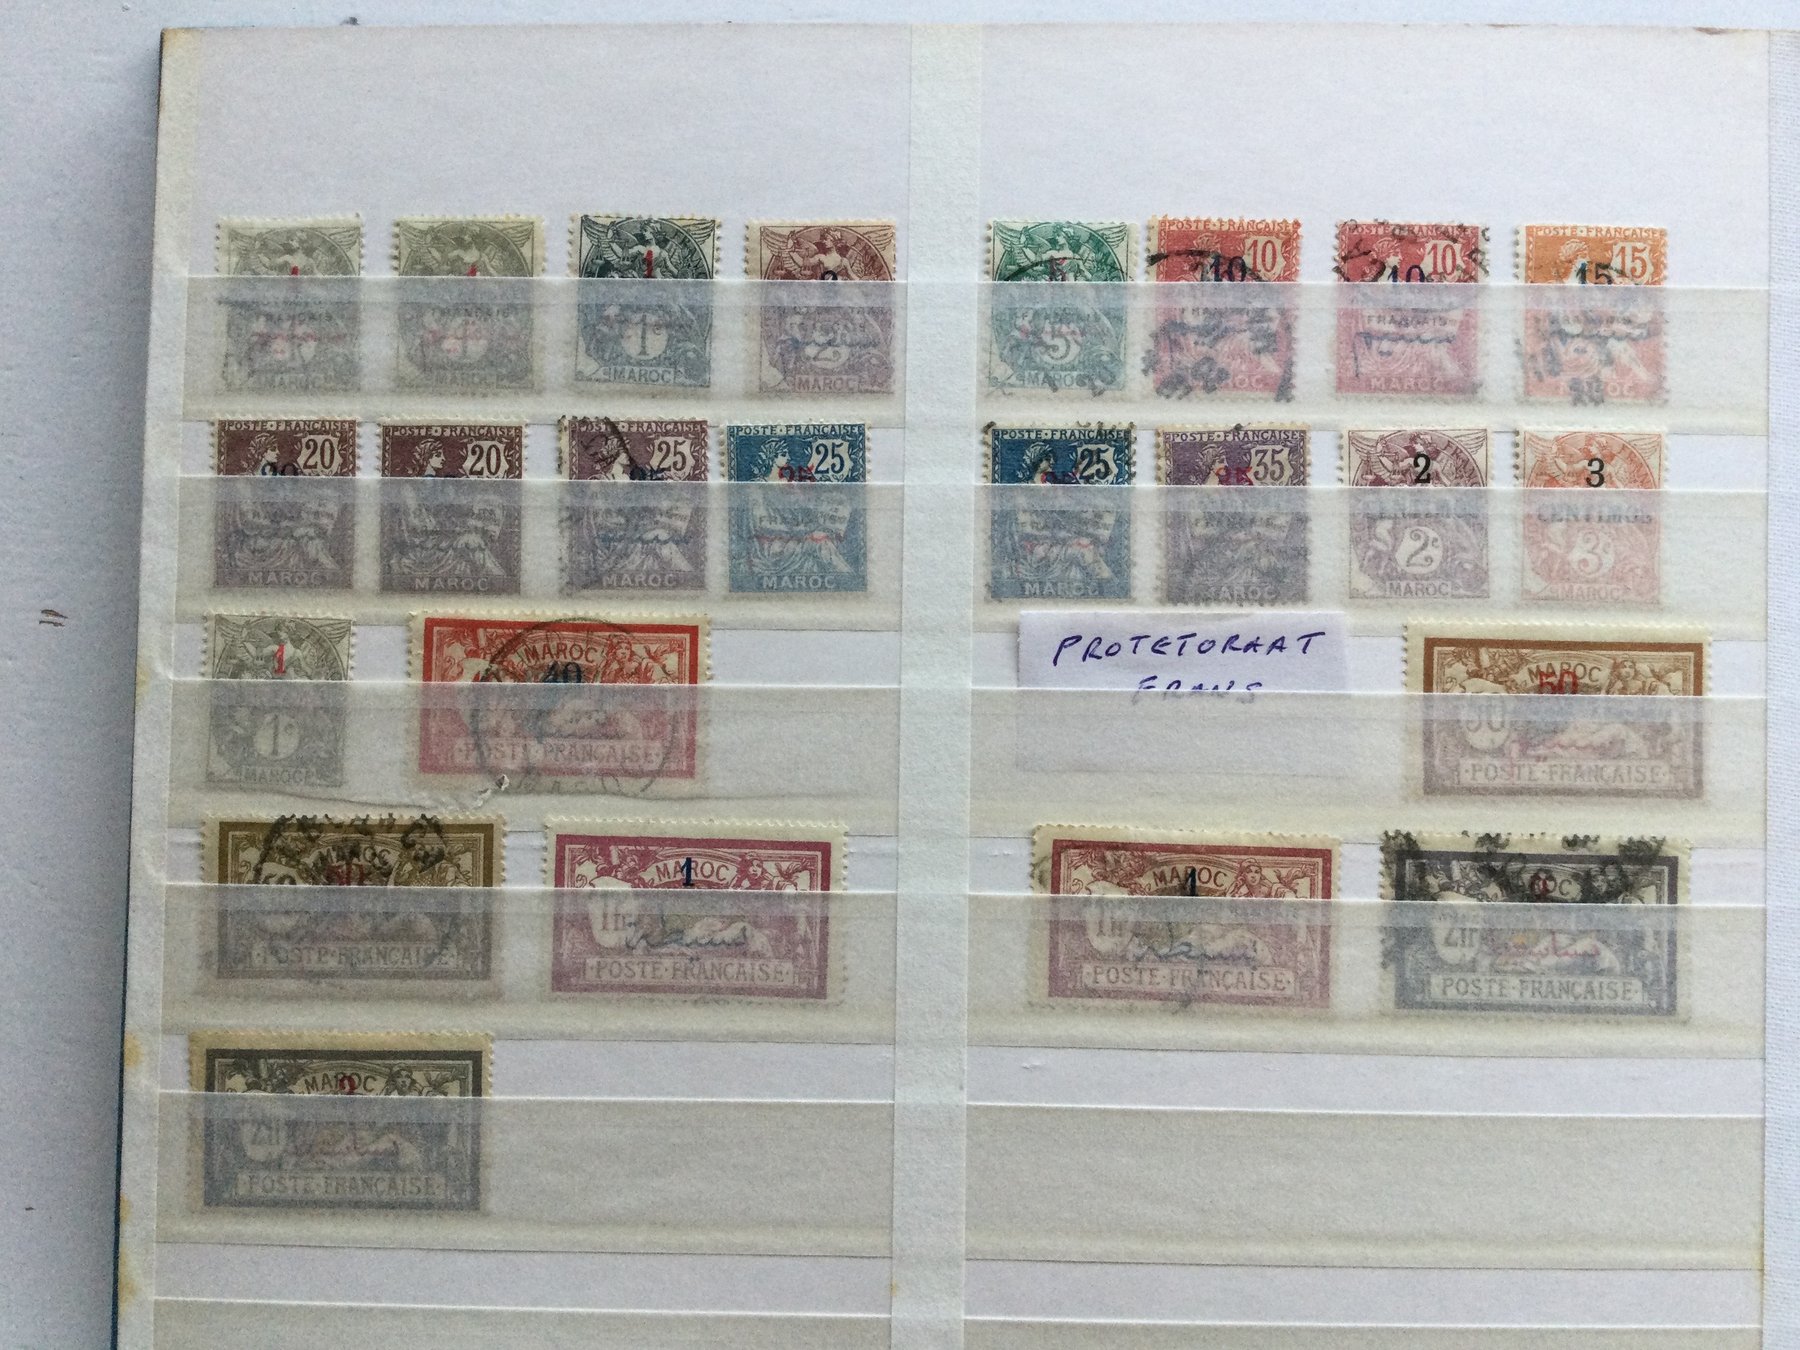 Morocco - British post offices - , Tanger and Morocco in A4 - Catawiki